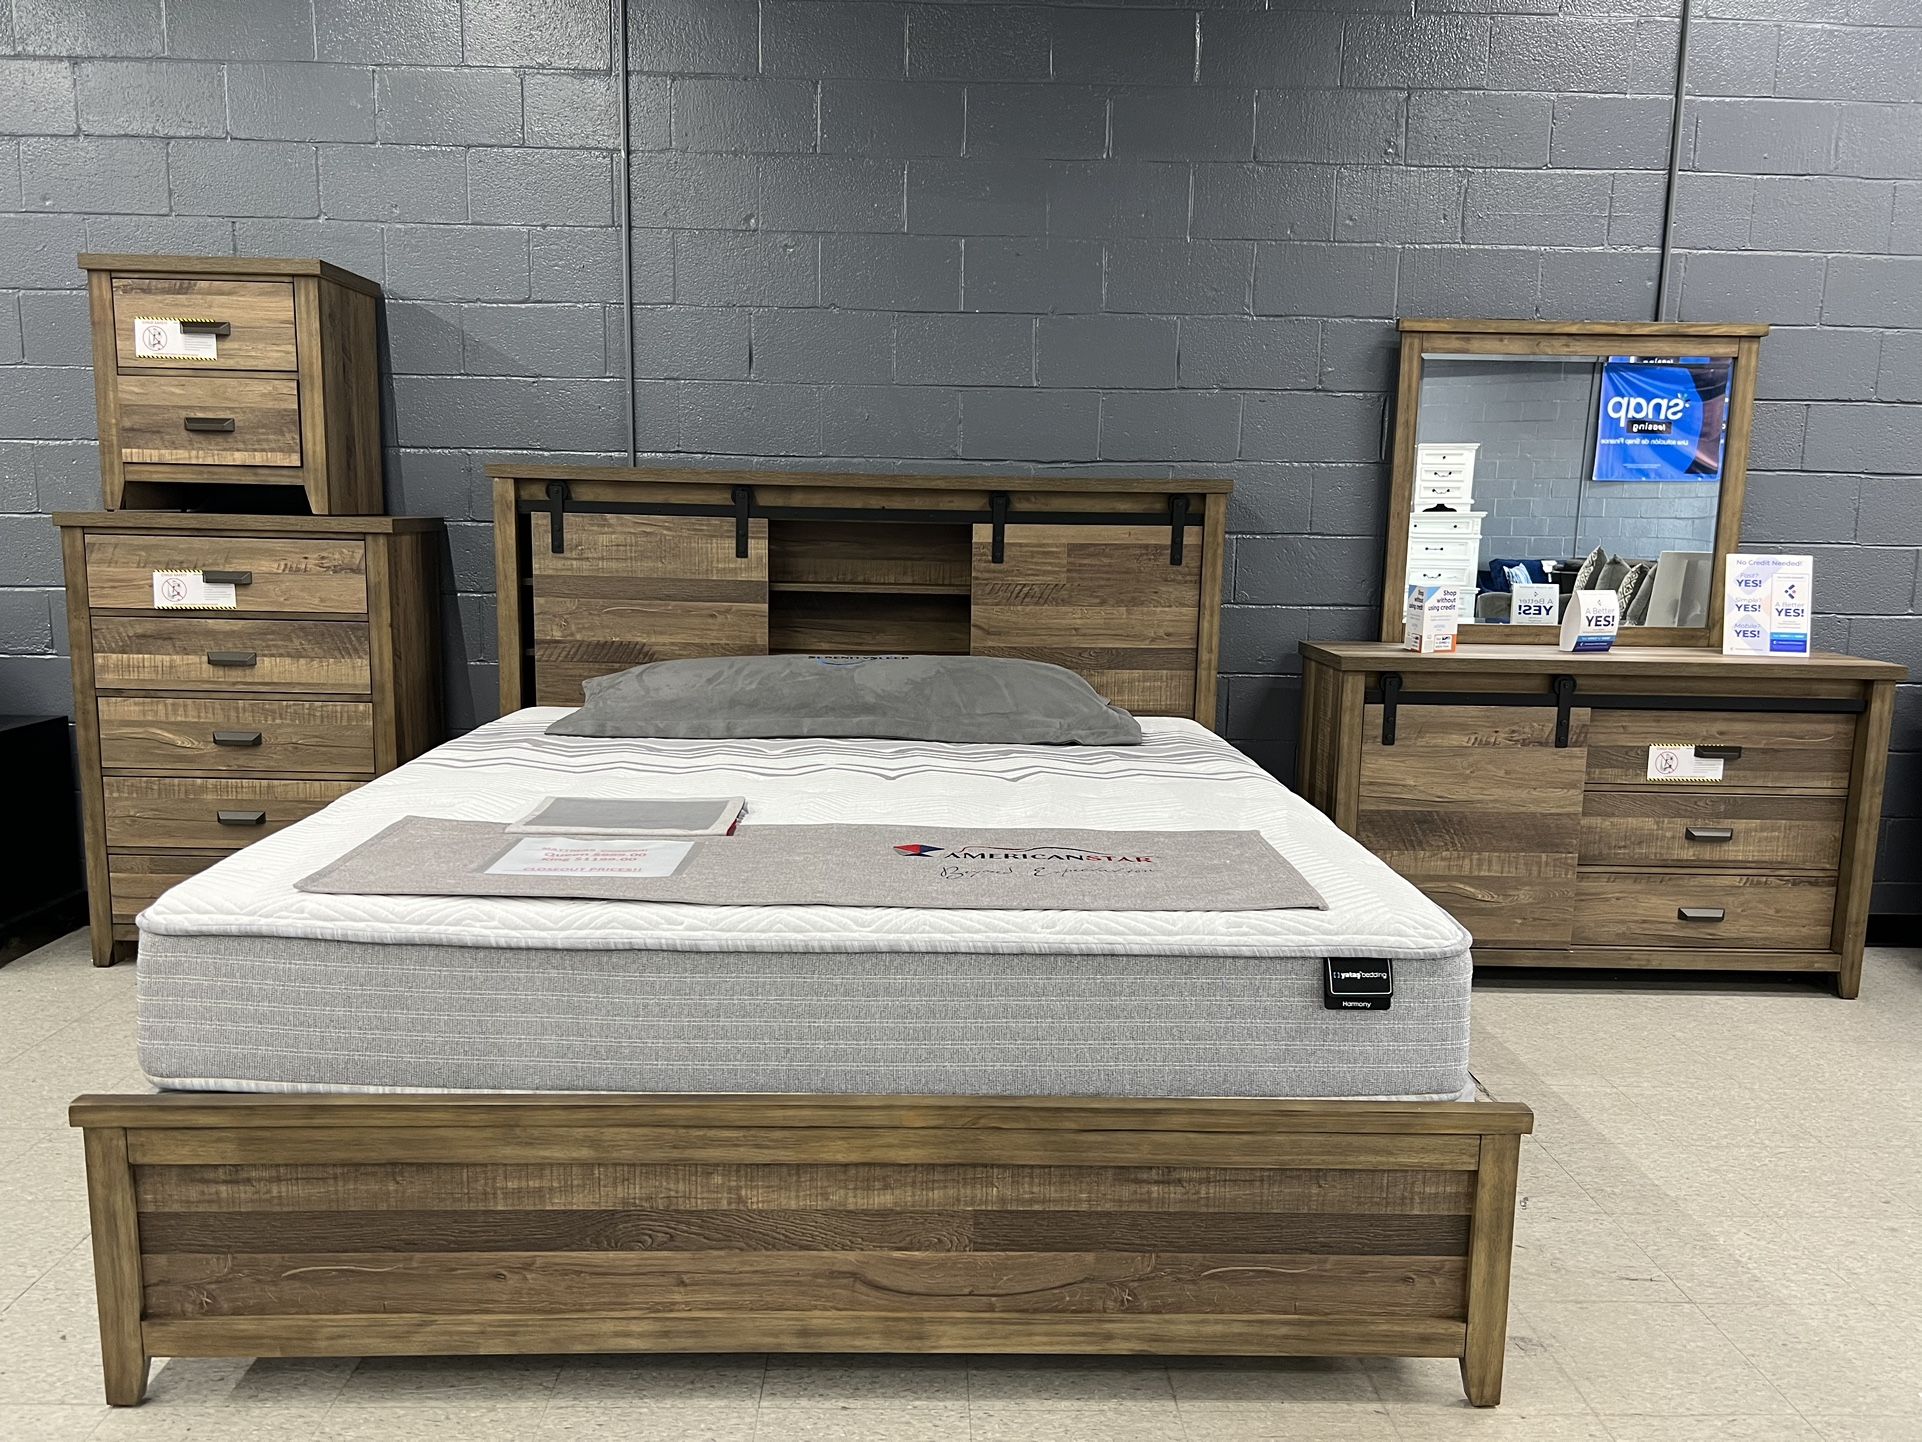 ‼️NEW ARRIVAL‼️ Brand New King Bedroom Group Only $1899.00!!